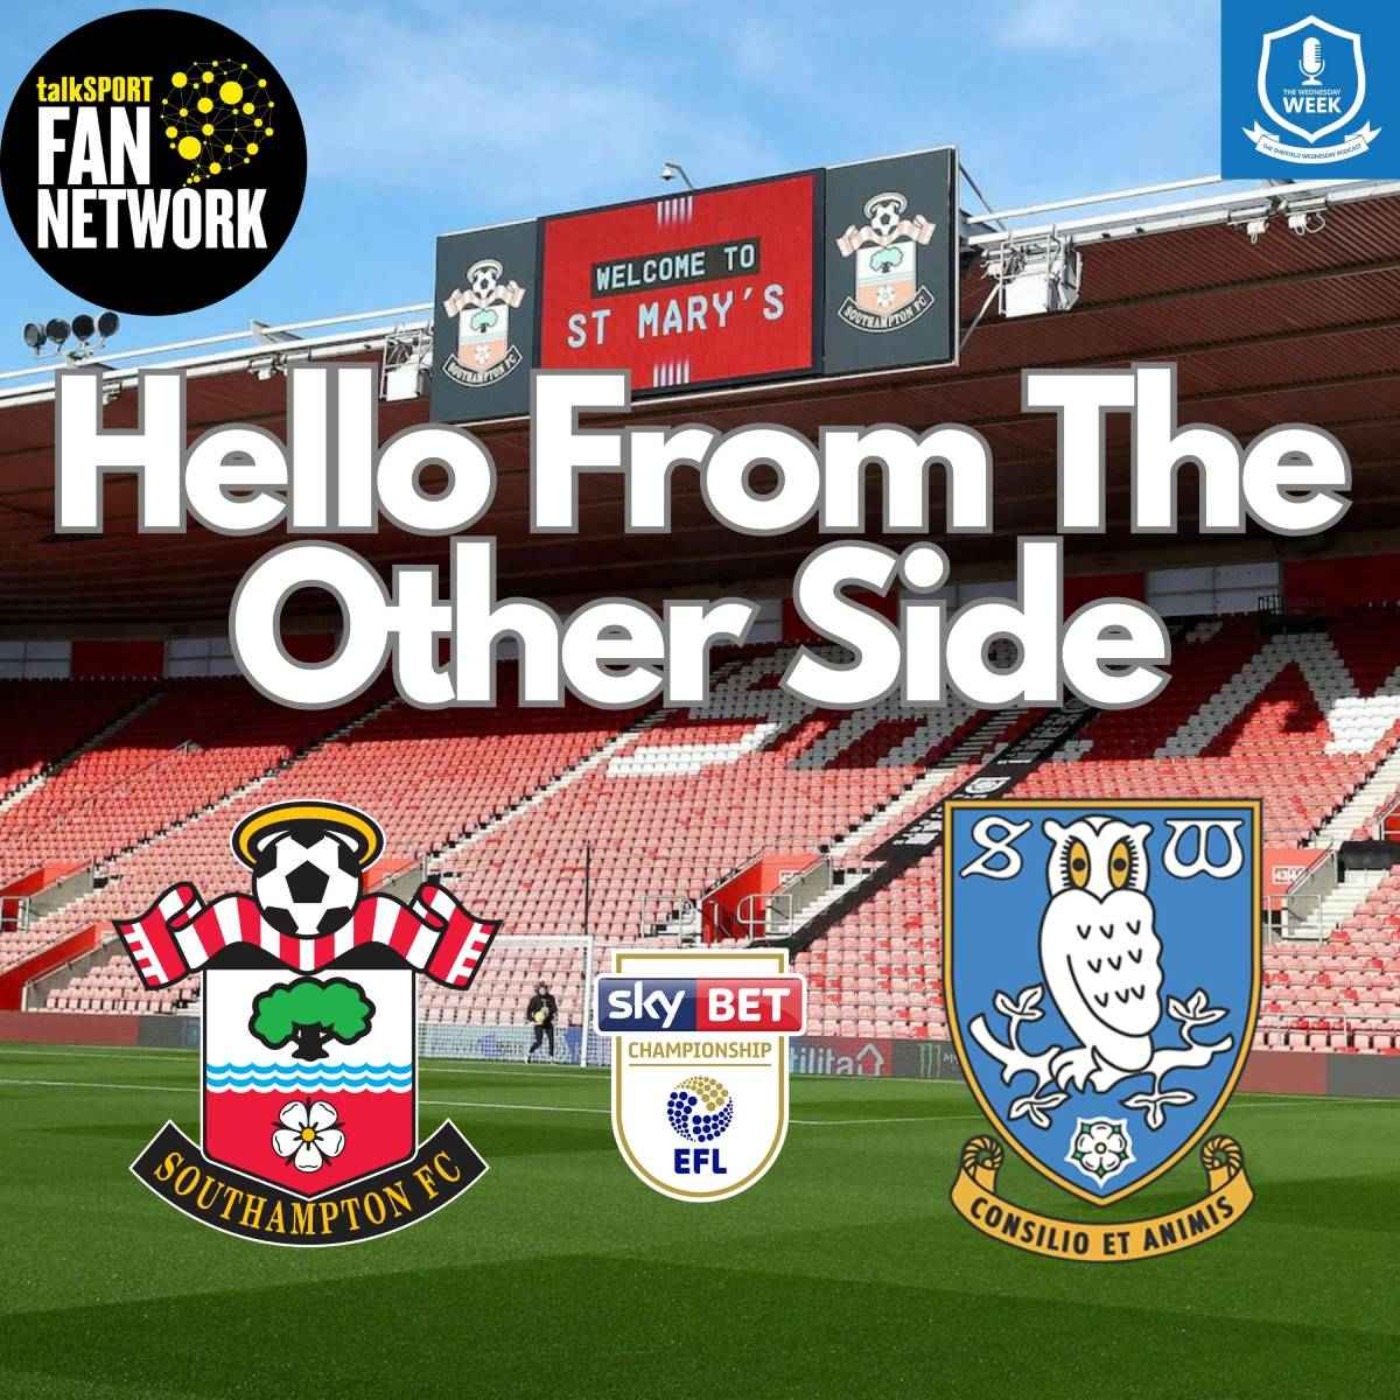 Hello From the Other Side - Southampton